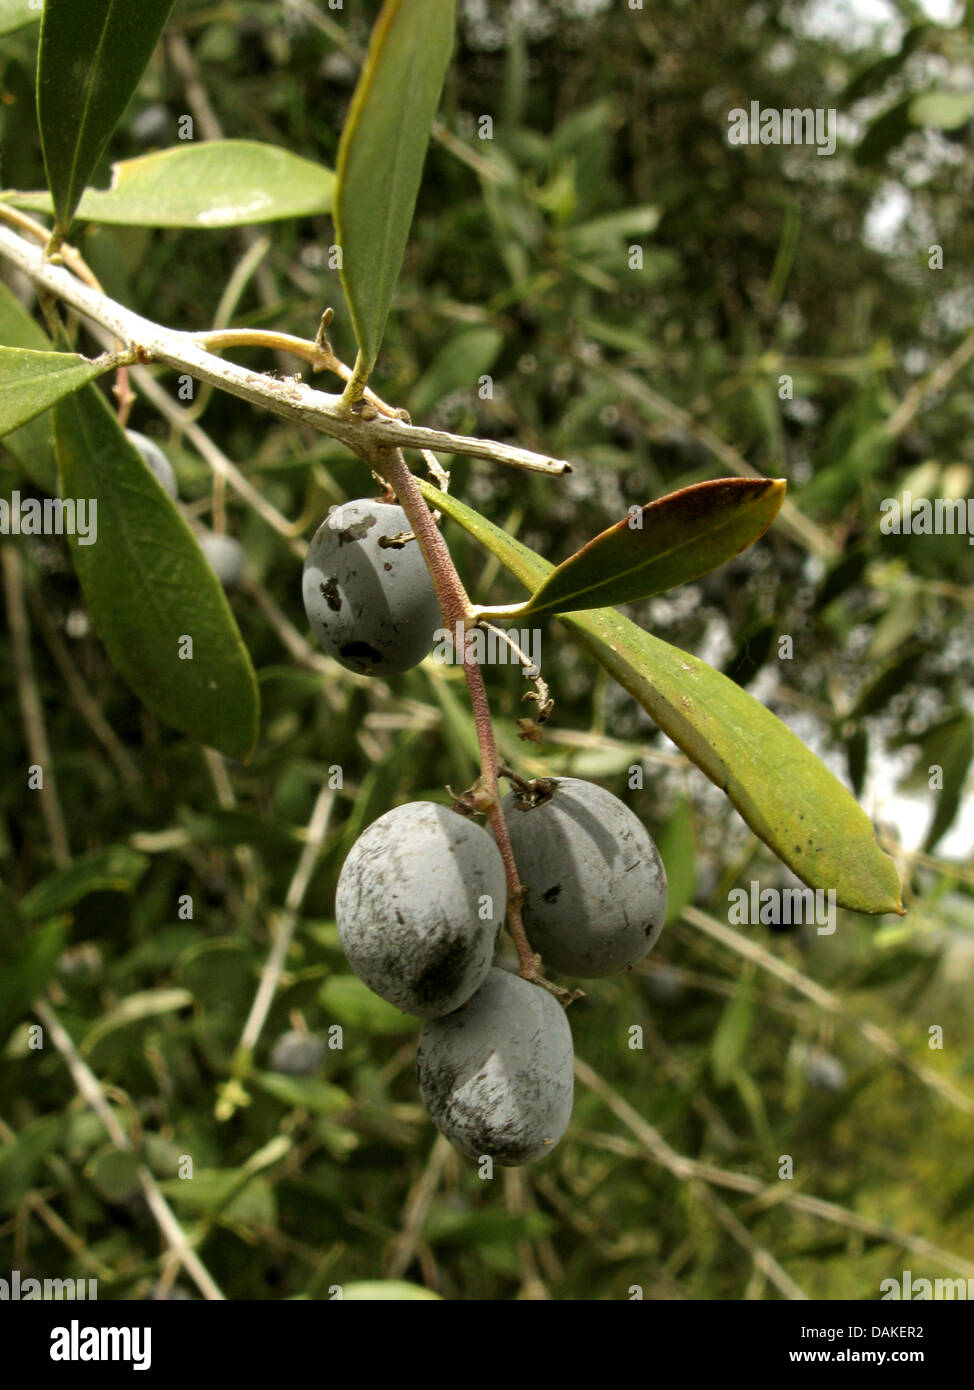 olive tree (Olea europaea ssp. sativa), branch with ripe olives, Greece, Peloponnese Stock Photo